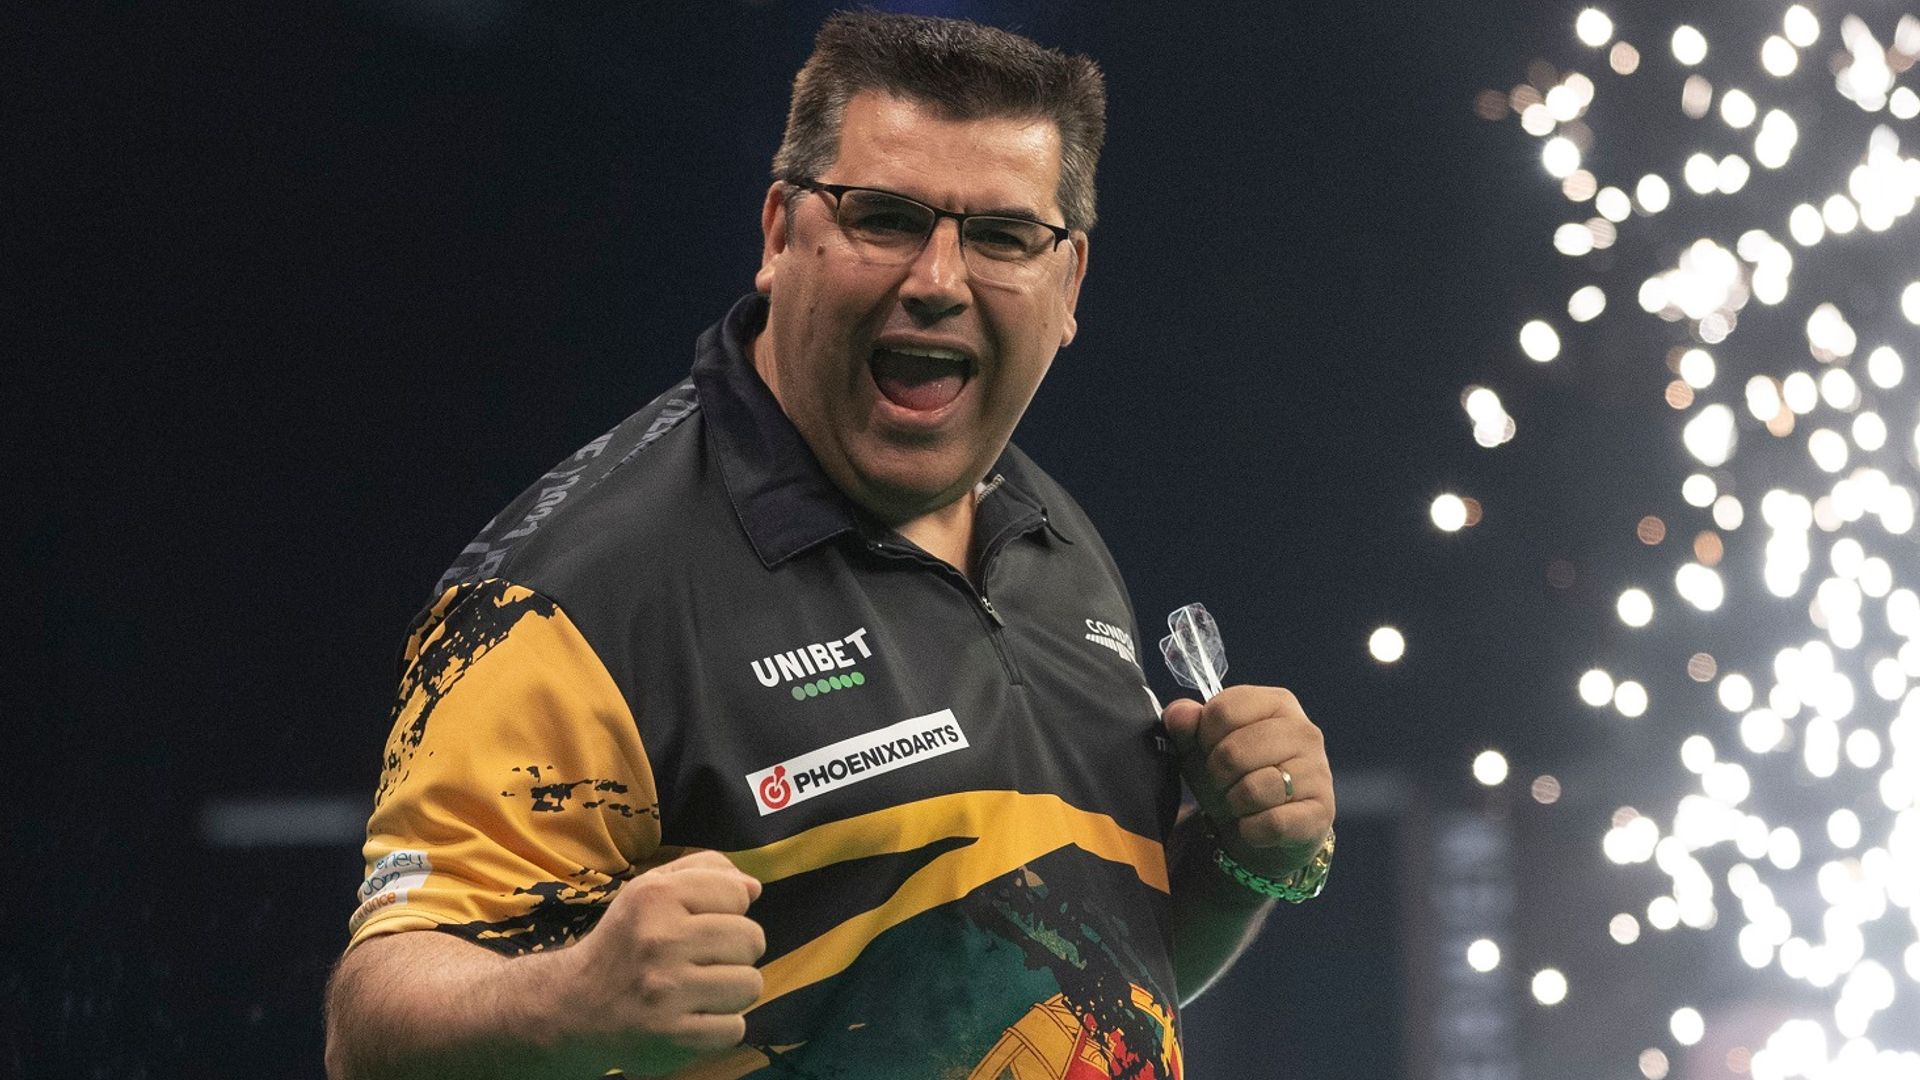 World Matchplay Darts: De Sousa, Price & Smith in action after Noppert wins LIVE!